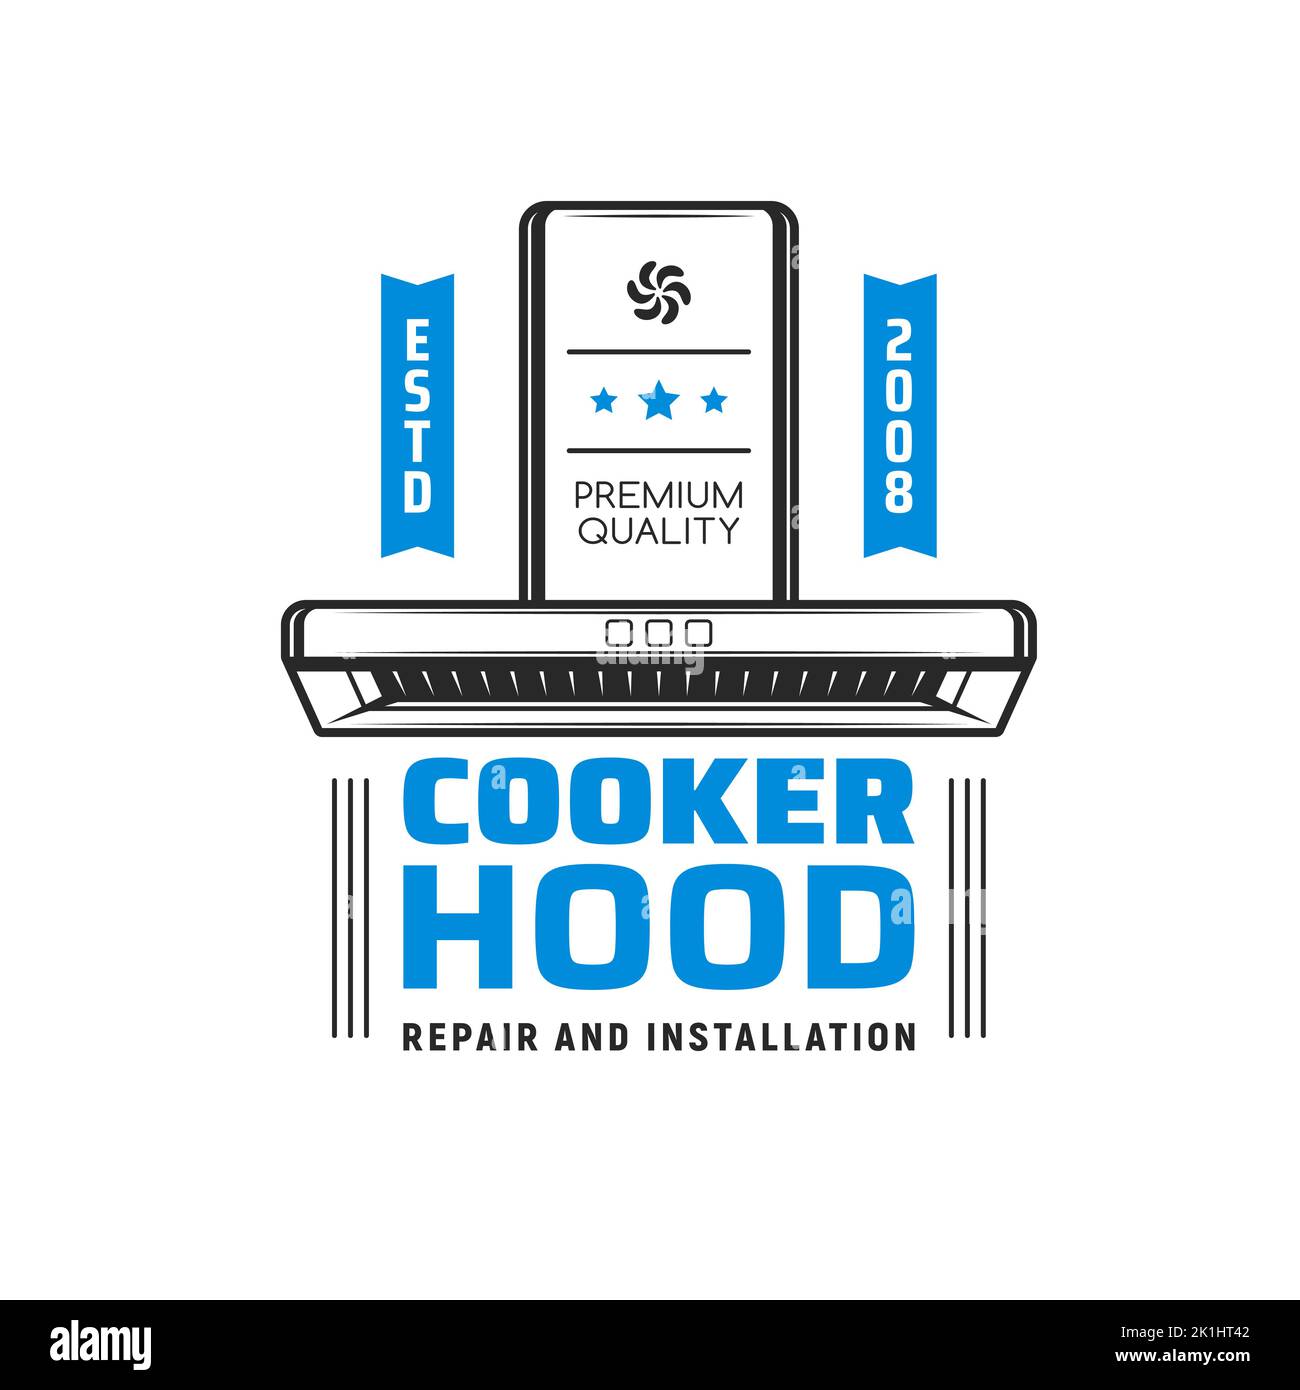 Cooker hood icon for kitchen exhausts and stove ranges repair or installation service, vector. Home appliances equipment and restaurant cooking smell extractors or professional air cleaning equipment Stock Vector